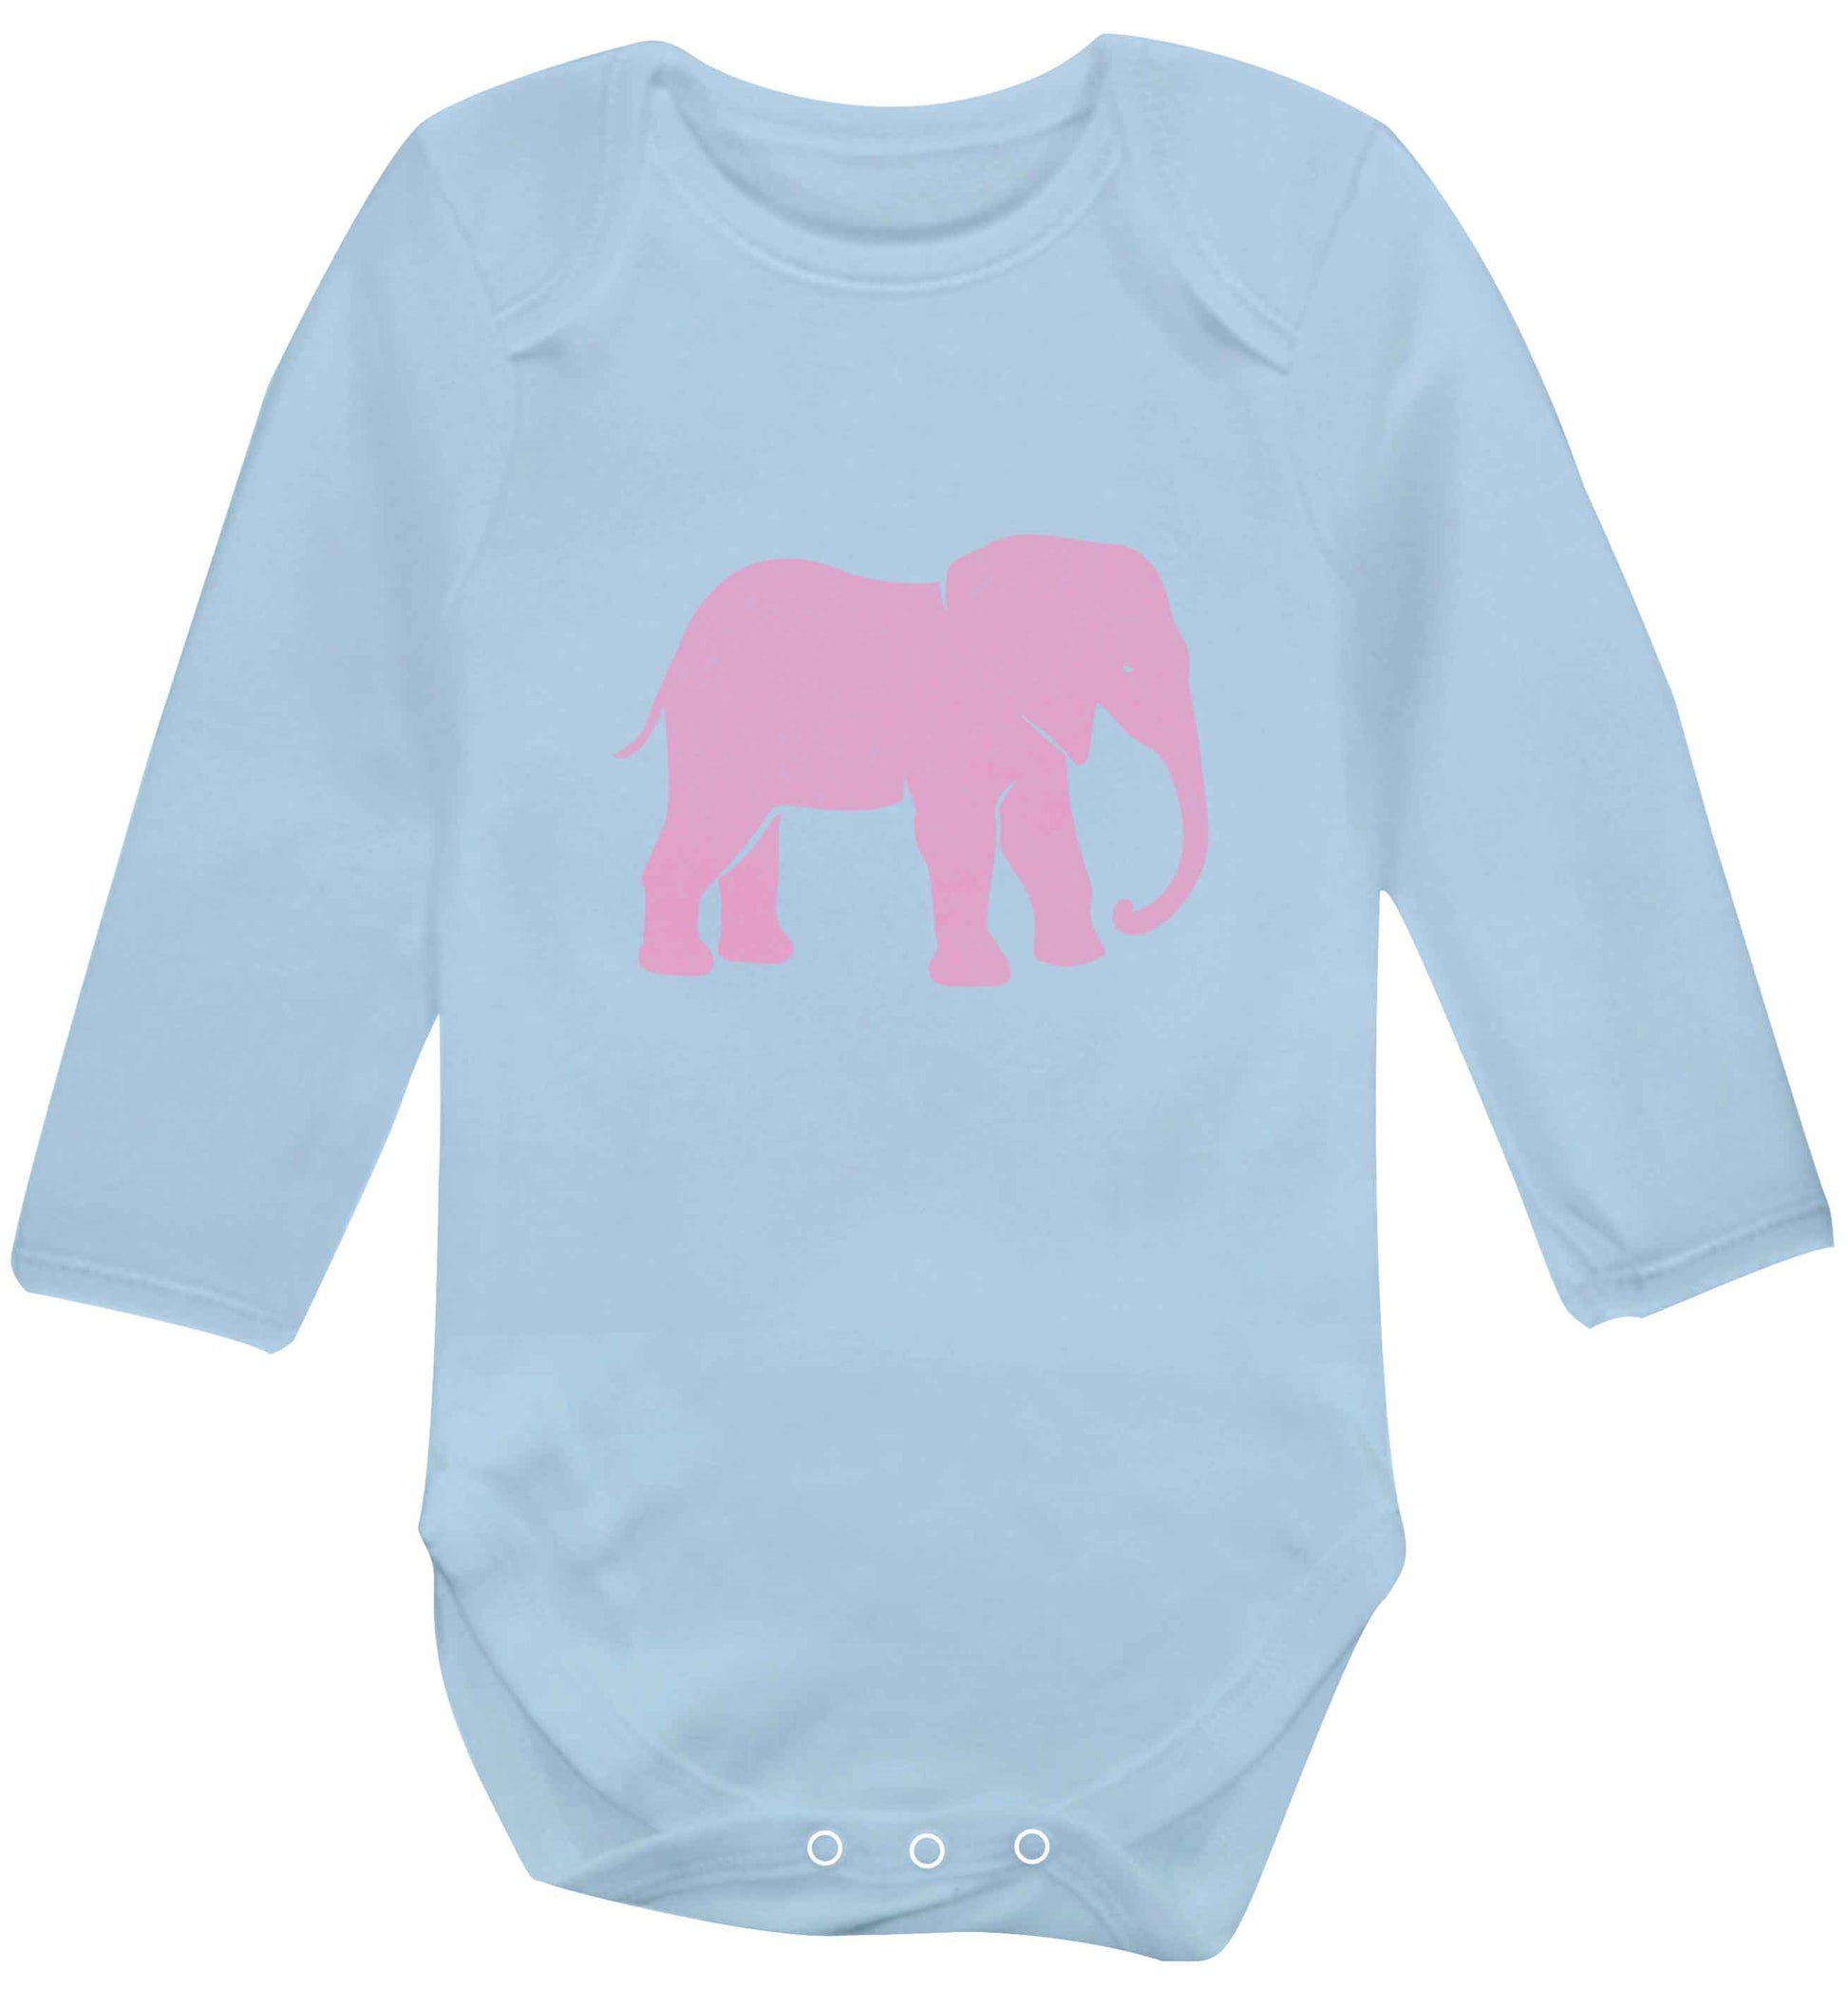 Pink elephant baby vest long sleeved pale blue 6-12 months